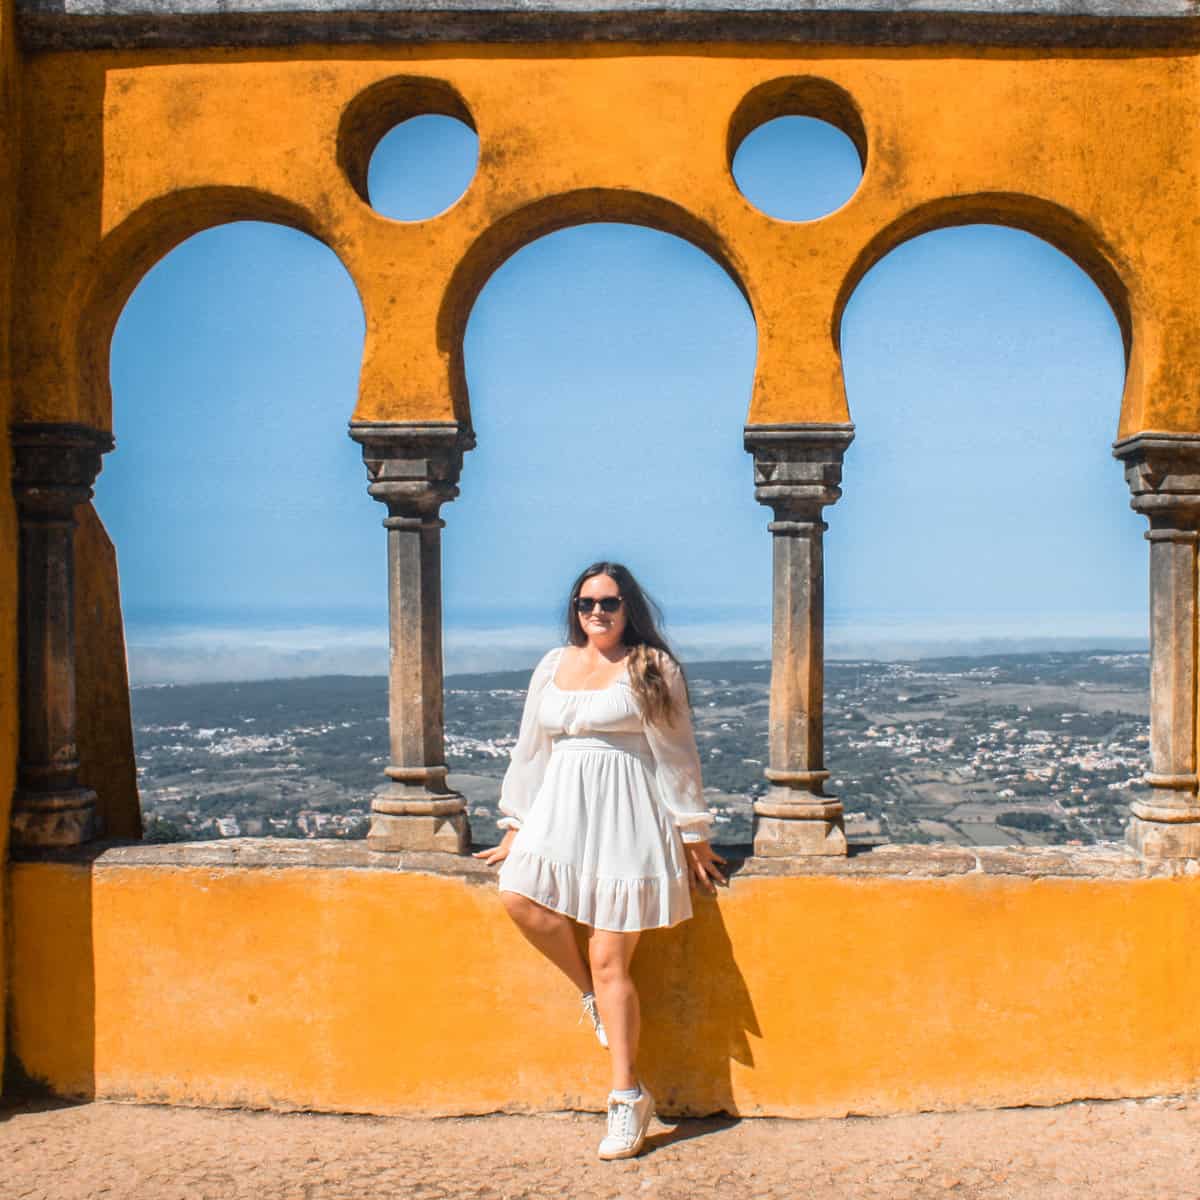 Posing for an Instagram photo at Sintra's Pena Palace. 